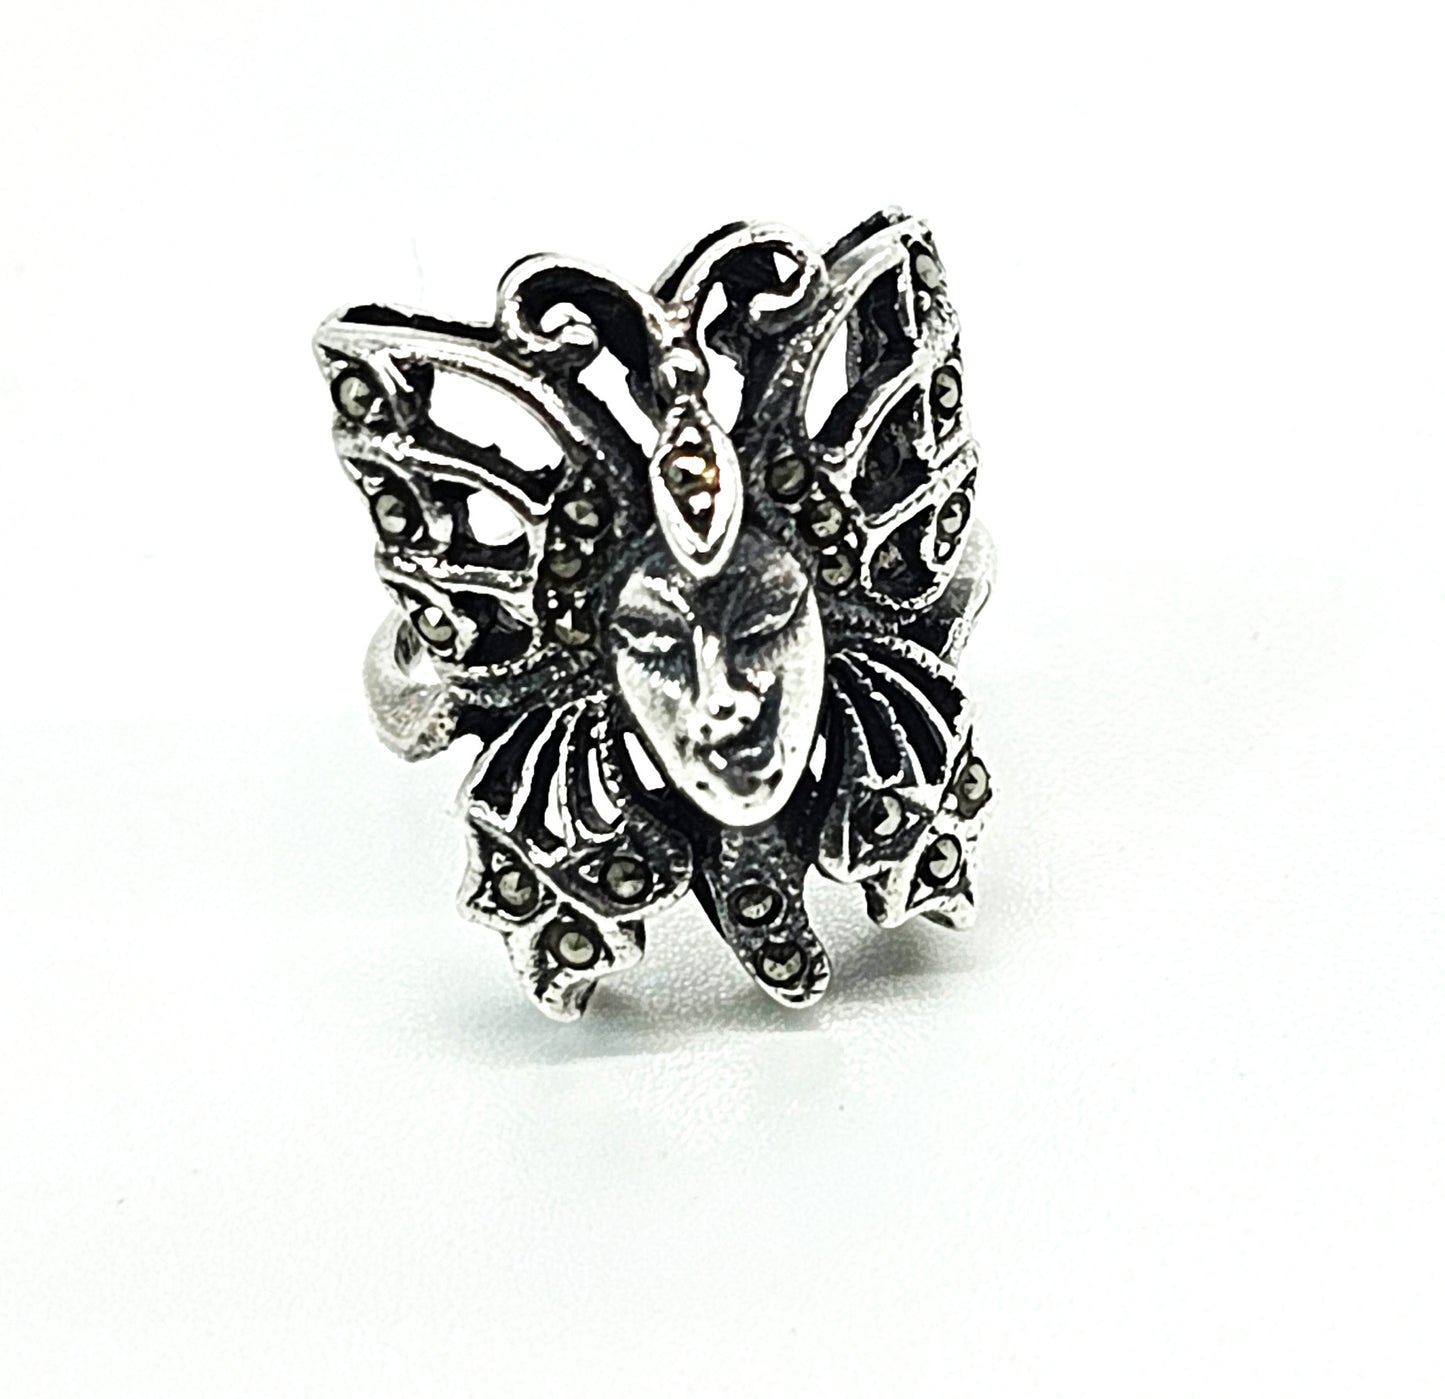 Butterfly Fairy Queen Nymph marcasite sterling silver vintage ring size 3.5